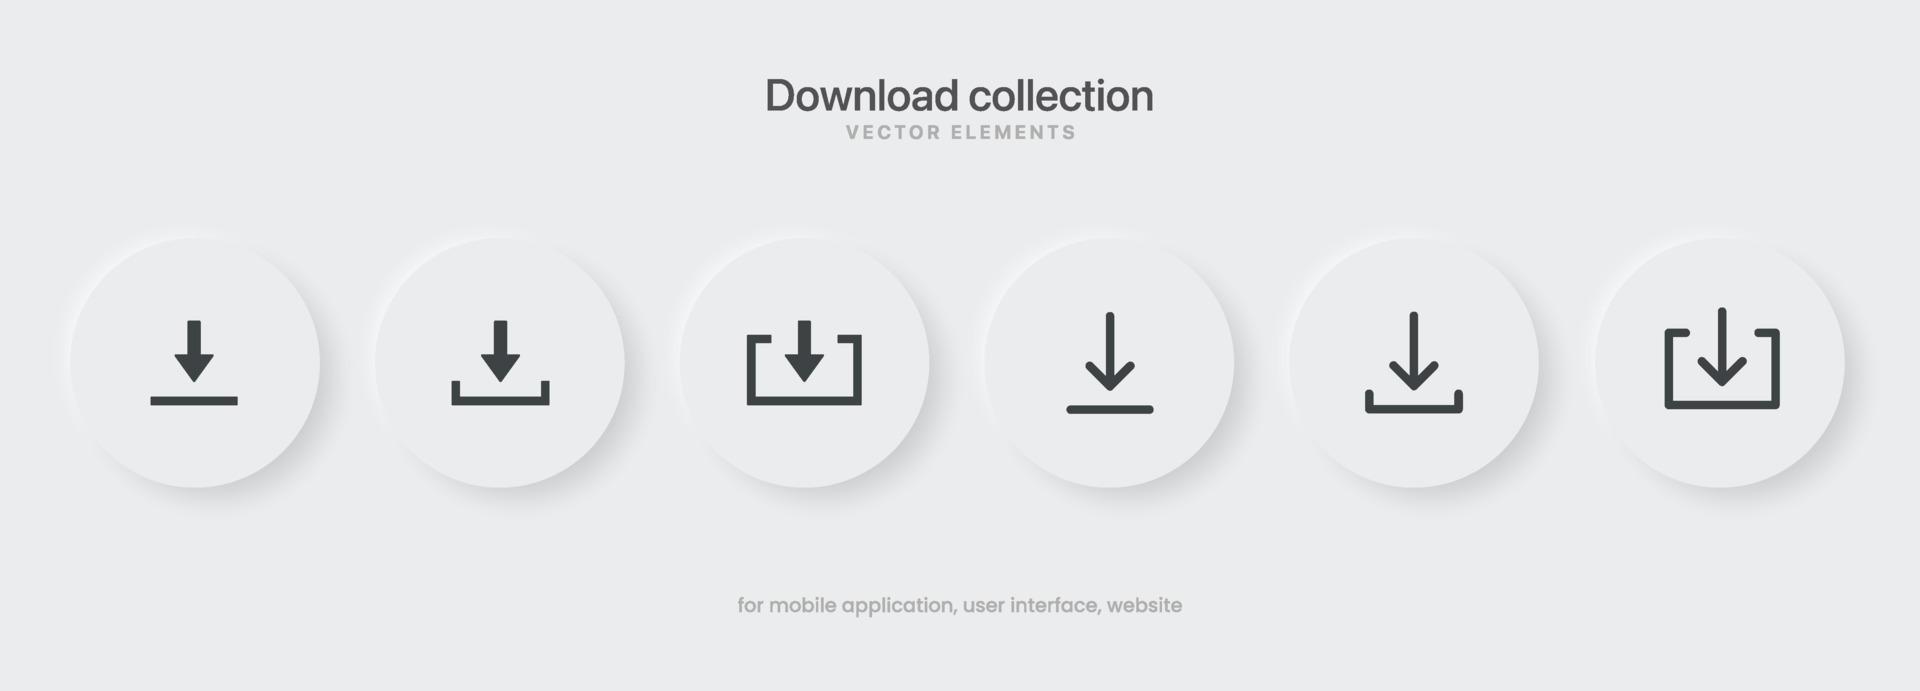 3D black download upload button icon. Upload icon. Down arrow bottom side symbol. Click here button. Save cloud icon push button for UI UX, website, mobile application. vector